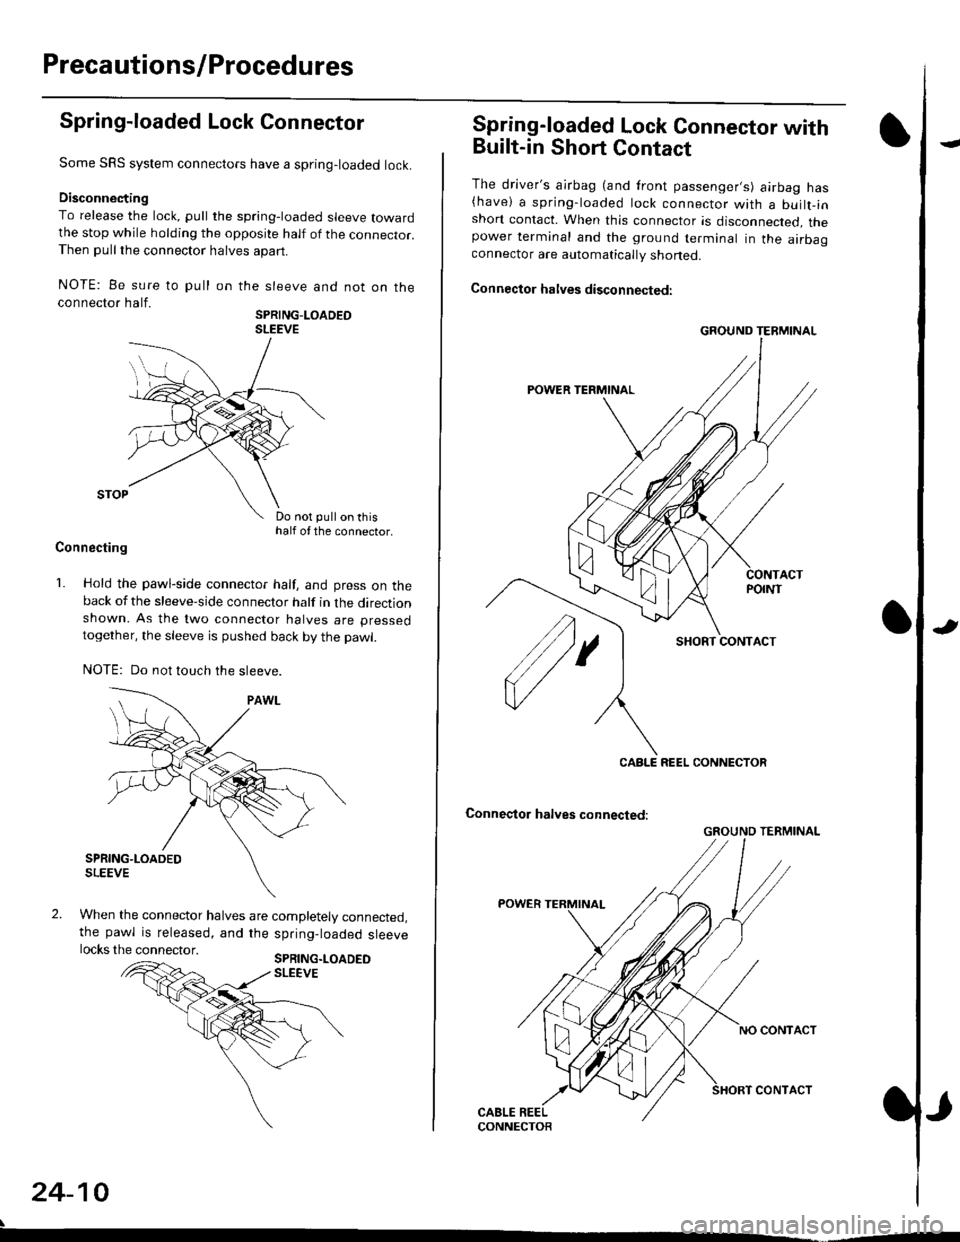 HONDA CIVIC 1996 6.G Owners Manual Preca utions/Procedures
Spring-loaded Lock Connector
Some SRS system connectors have a spring-loaded lock.
Disconnecting
To release the lock, pull the spring-loaded sleeve towardthe stop while holding